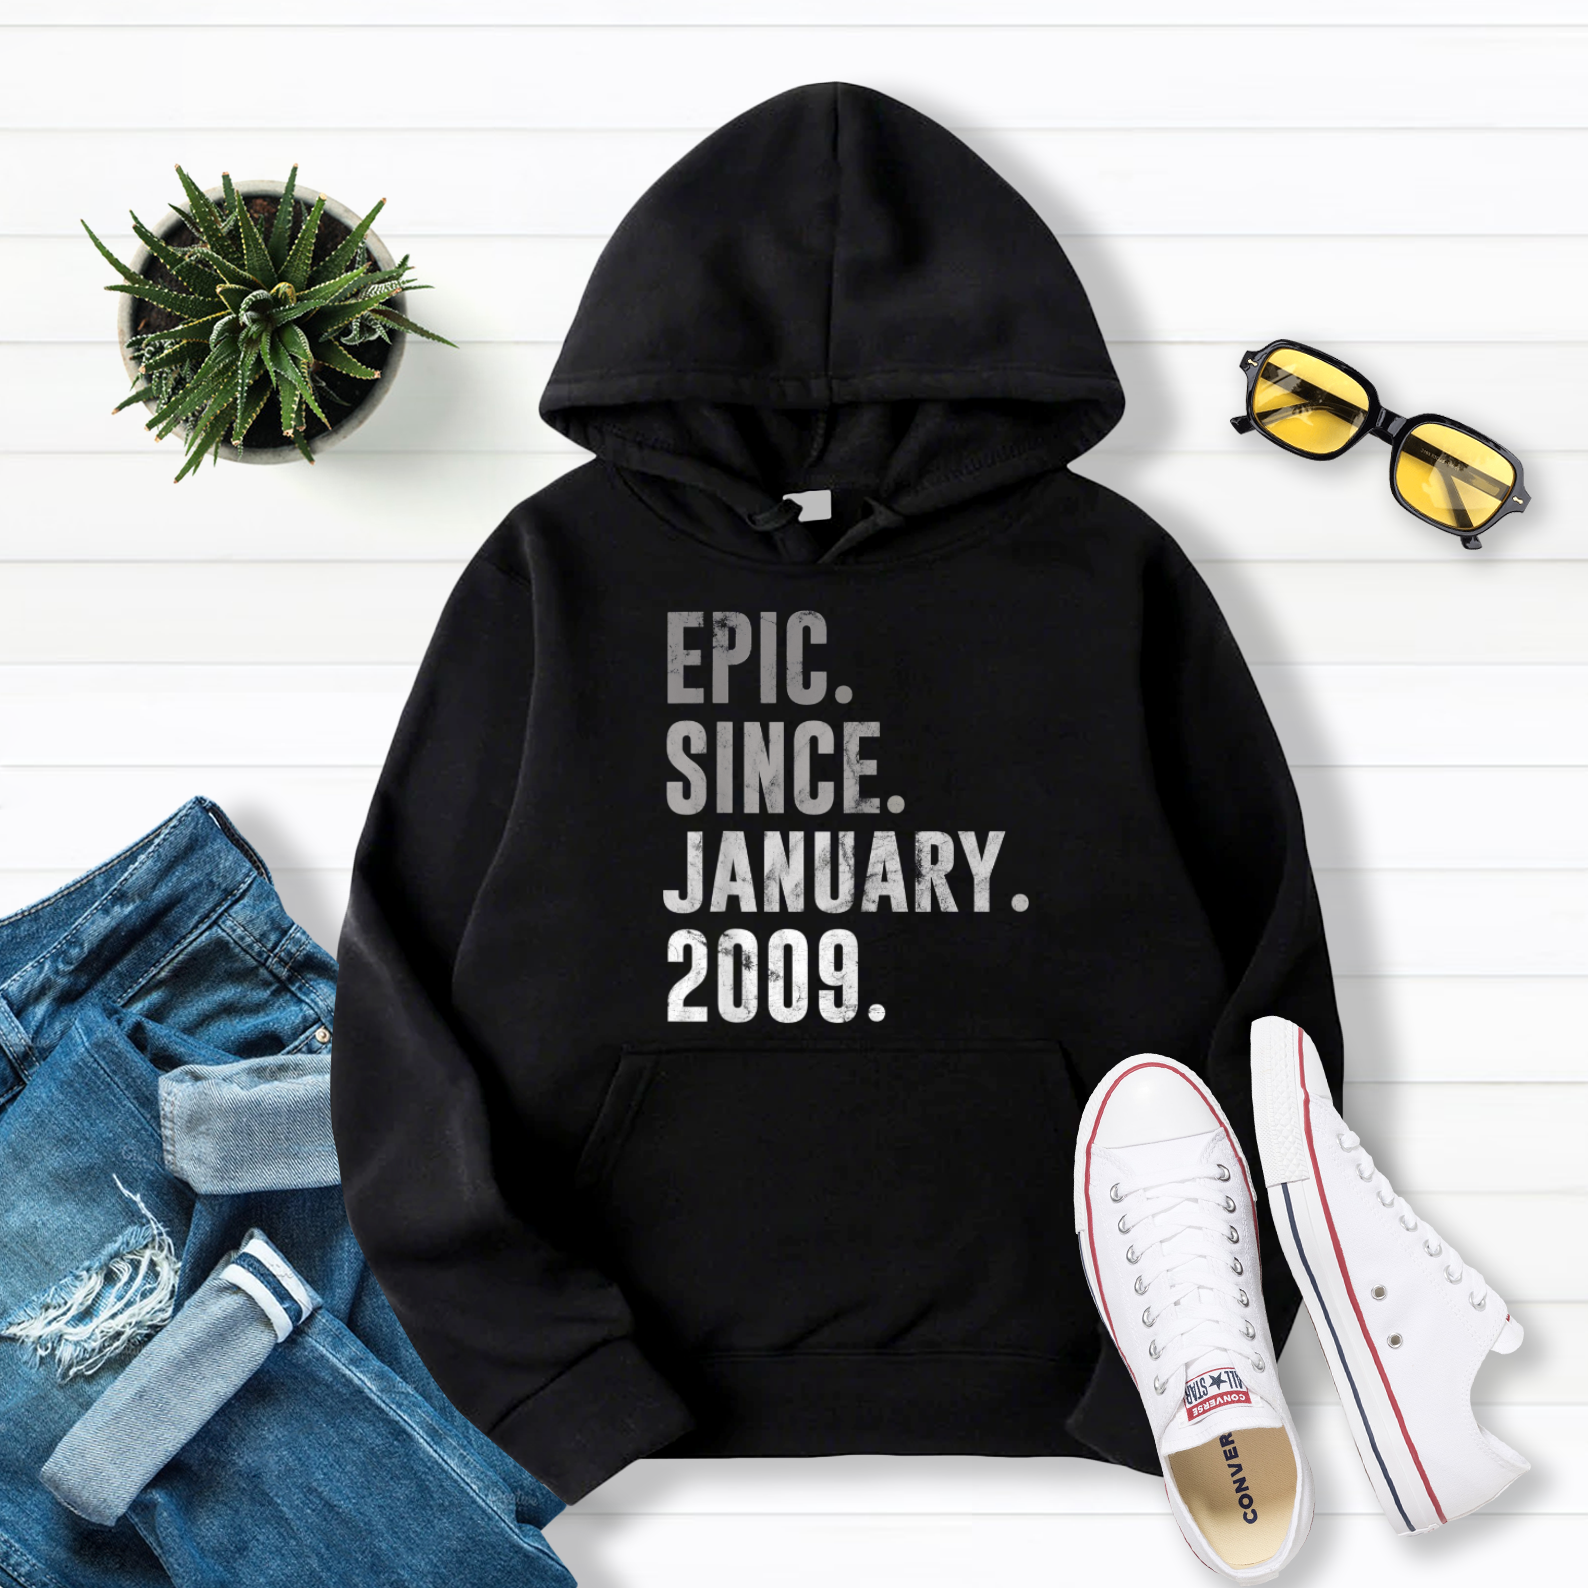 12 Year Old Birthday Gifts Epic Since January 2009 Pullover Hoodie Black S-5XL